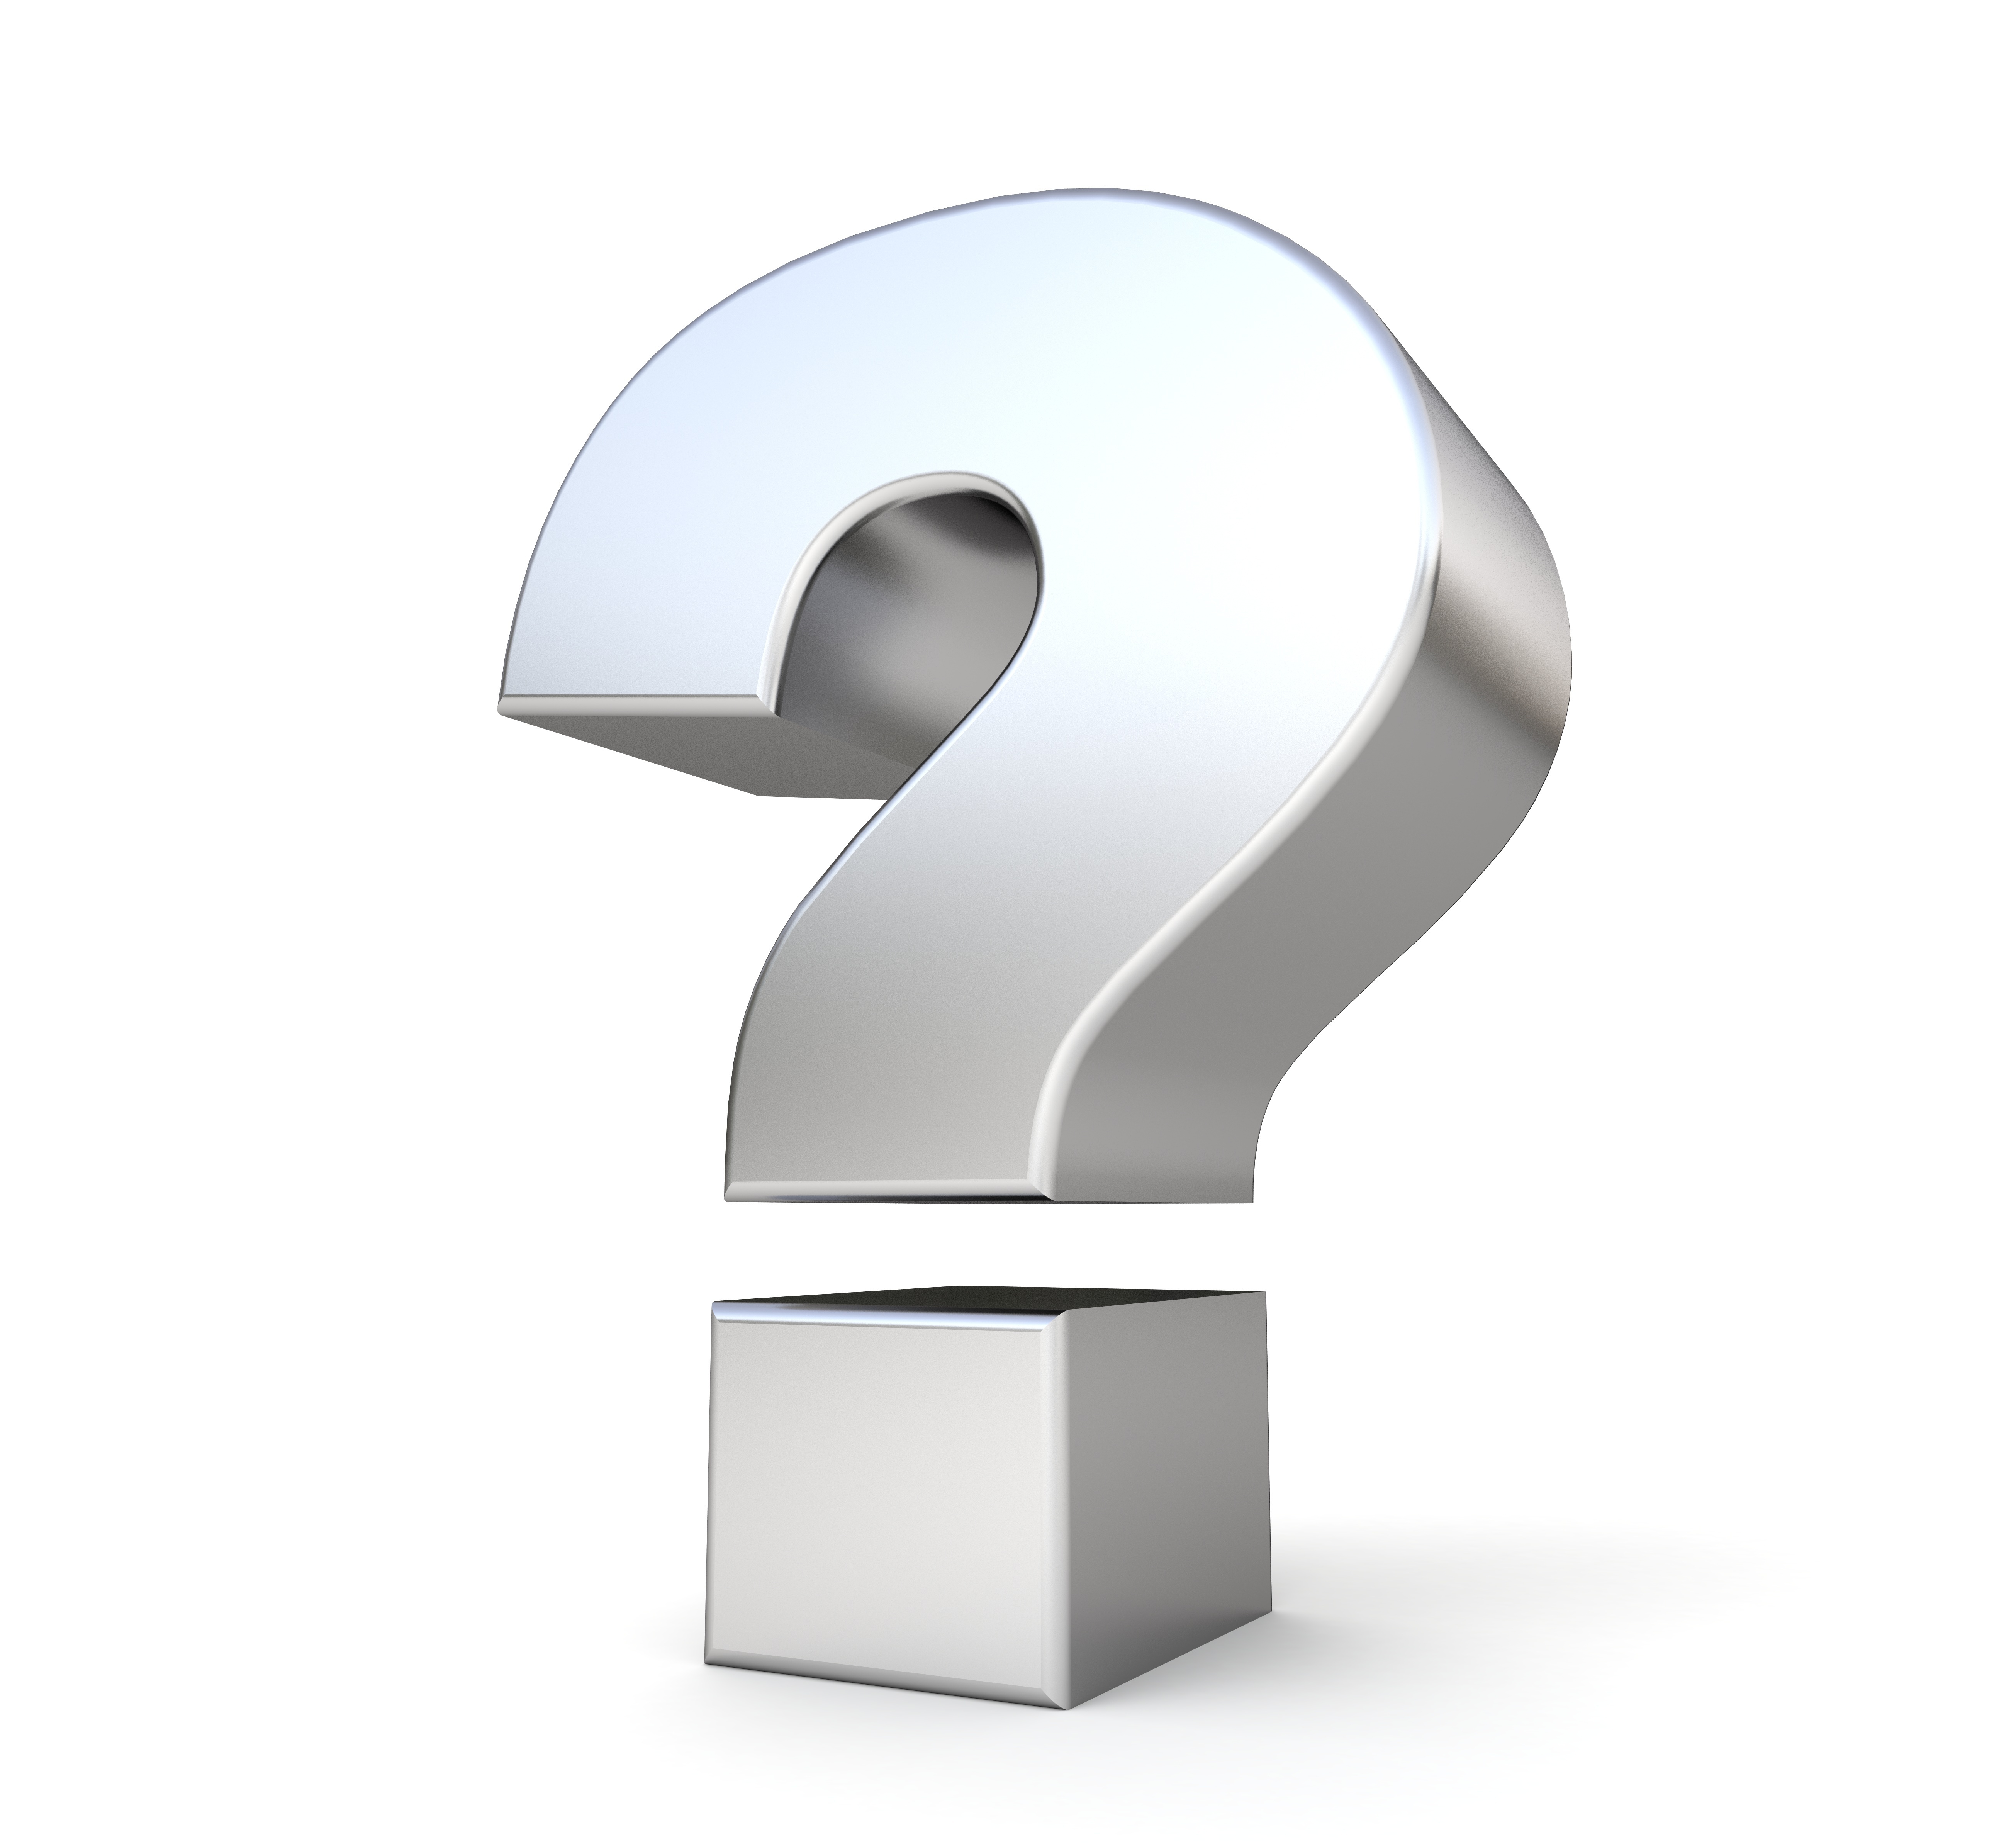 Free Question Mark, Download Free Clip Art, Free Clip Art on.